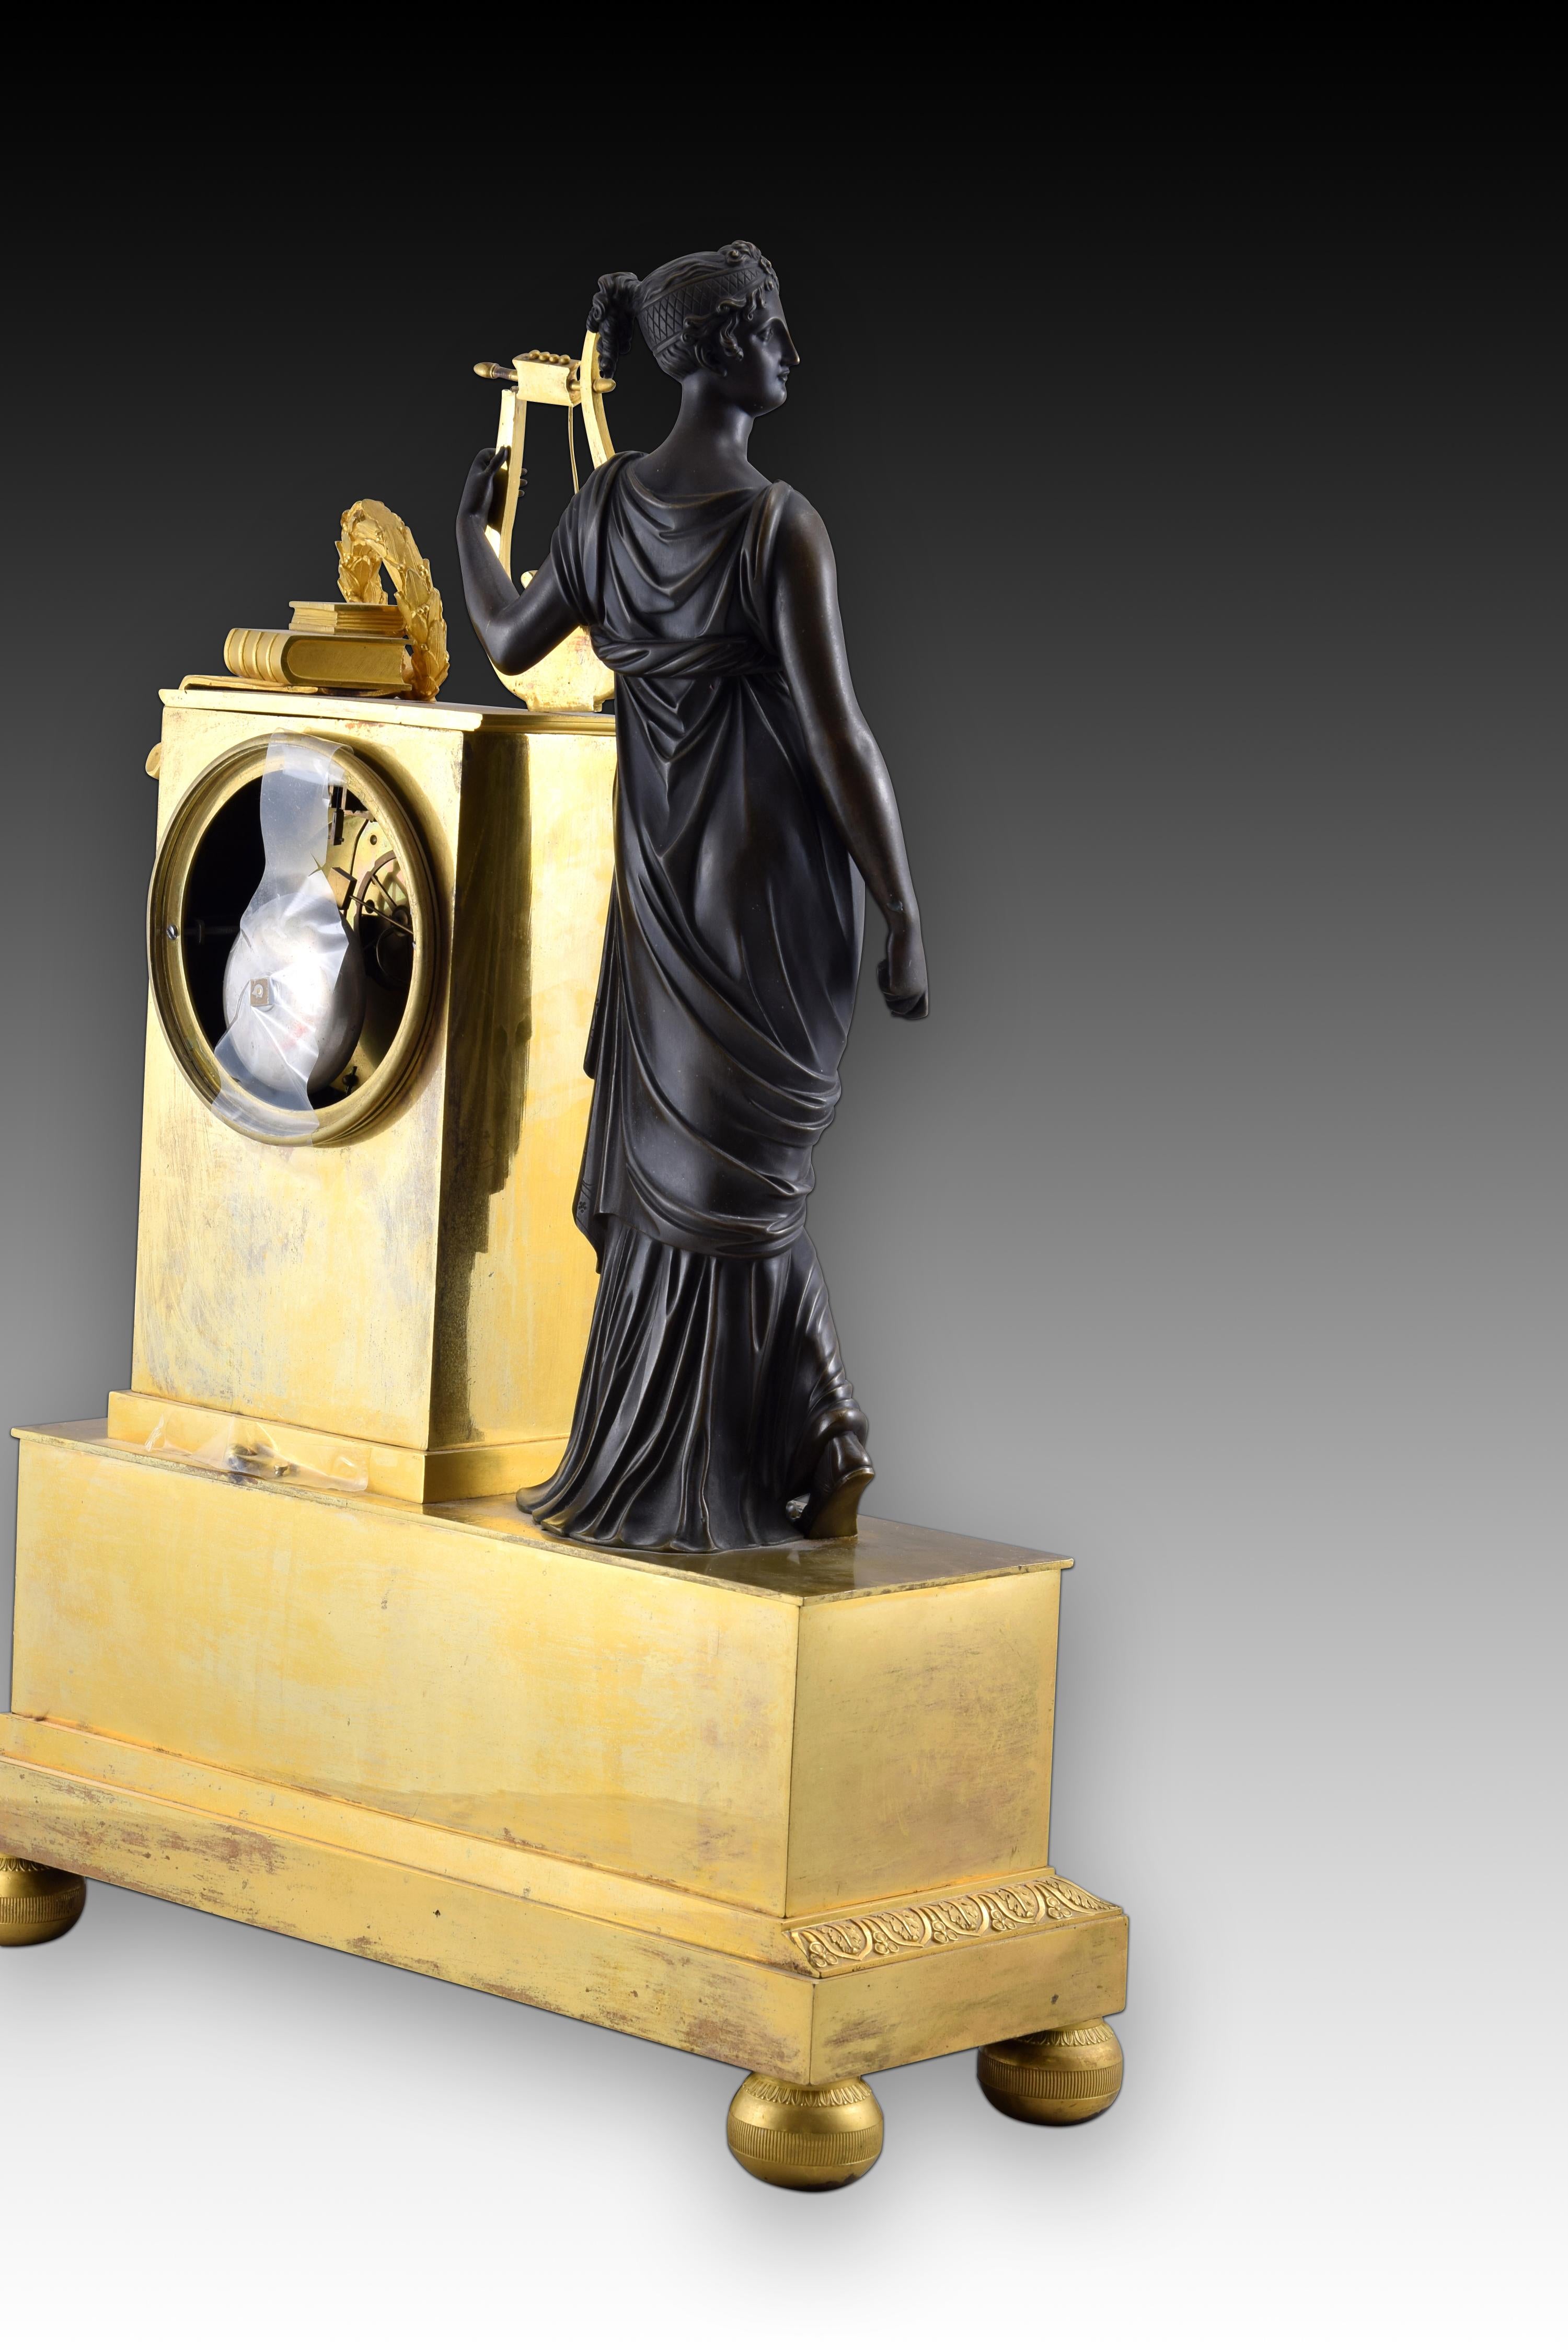 Neoclassical Revival Table clock with Muse and writers. Bronze, Paris movement. France, 19th century. For Sale